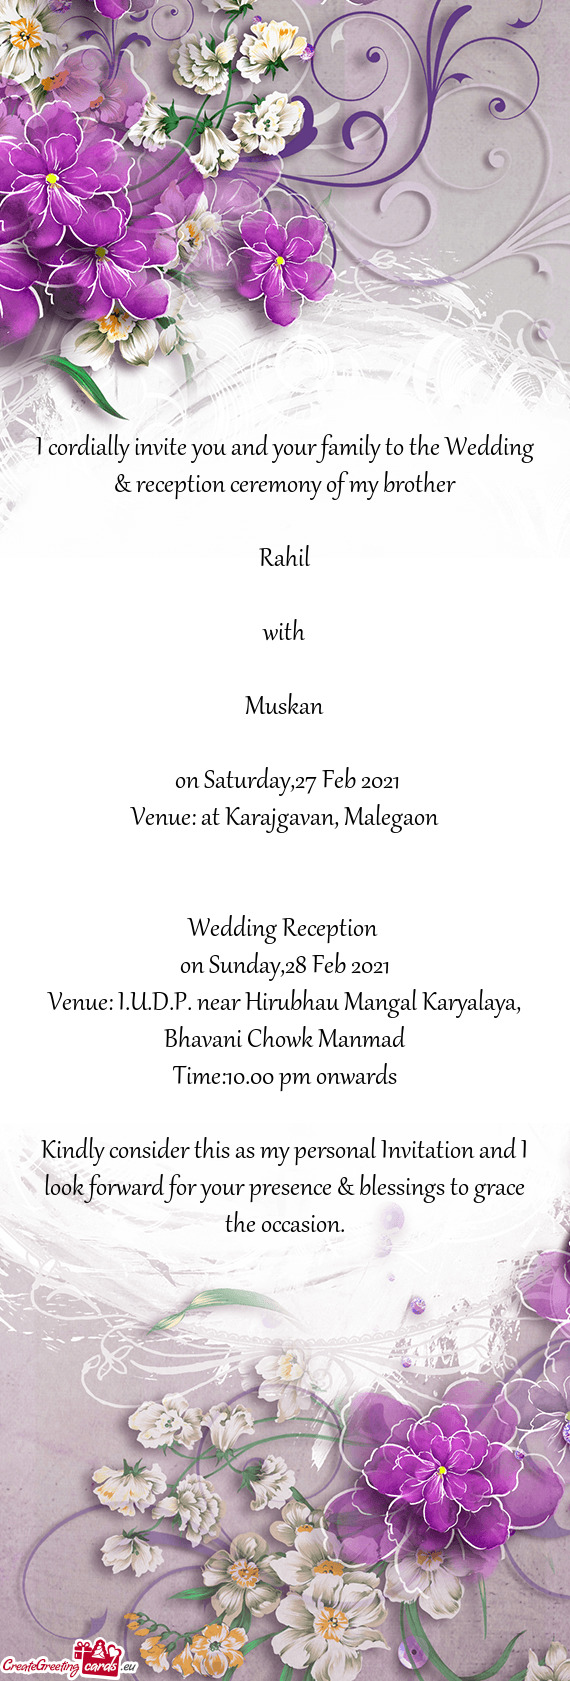 I cordially invite you and your family to the Wedding & reception ceremony of my brother